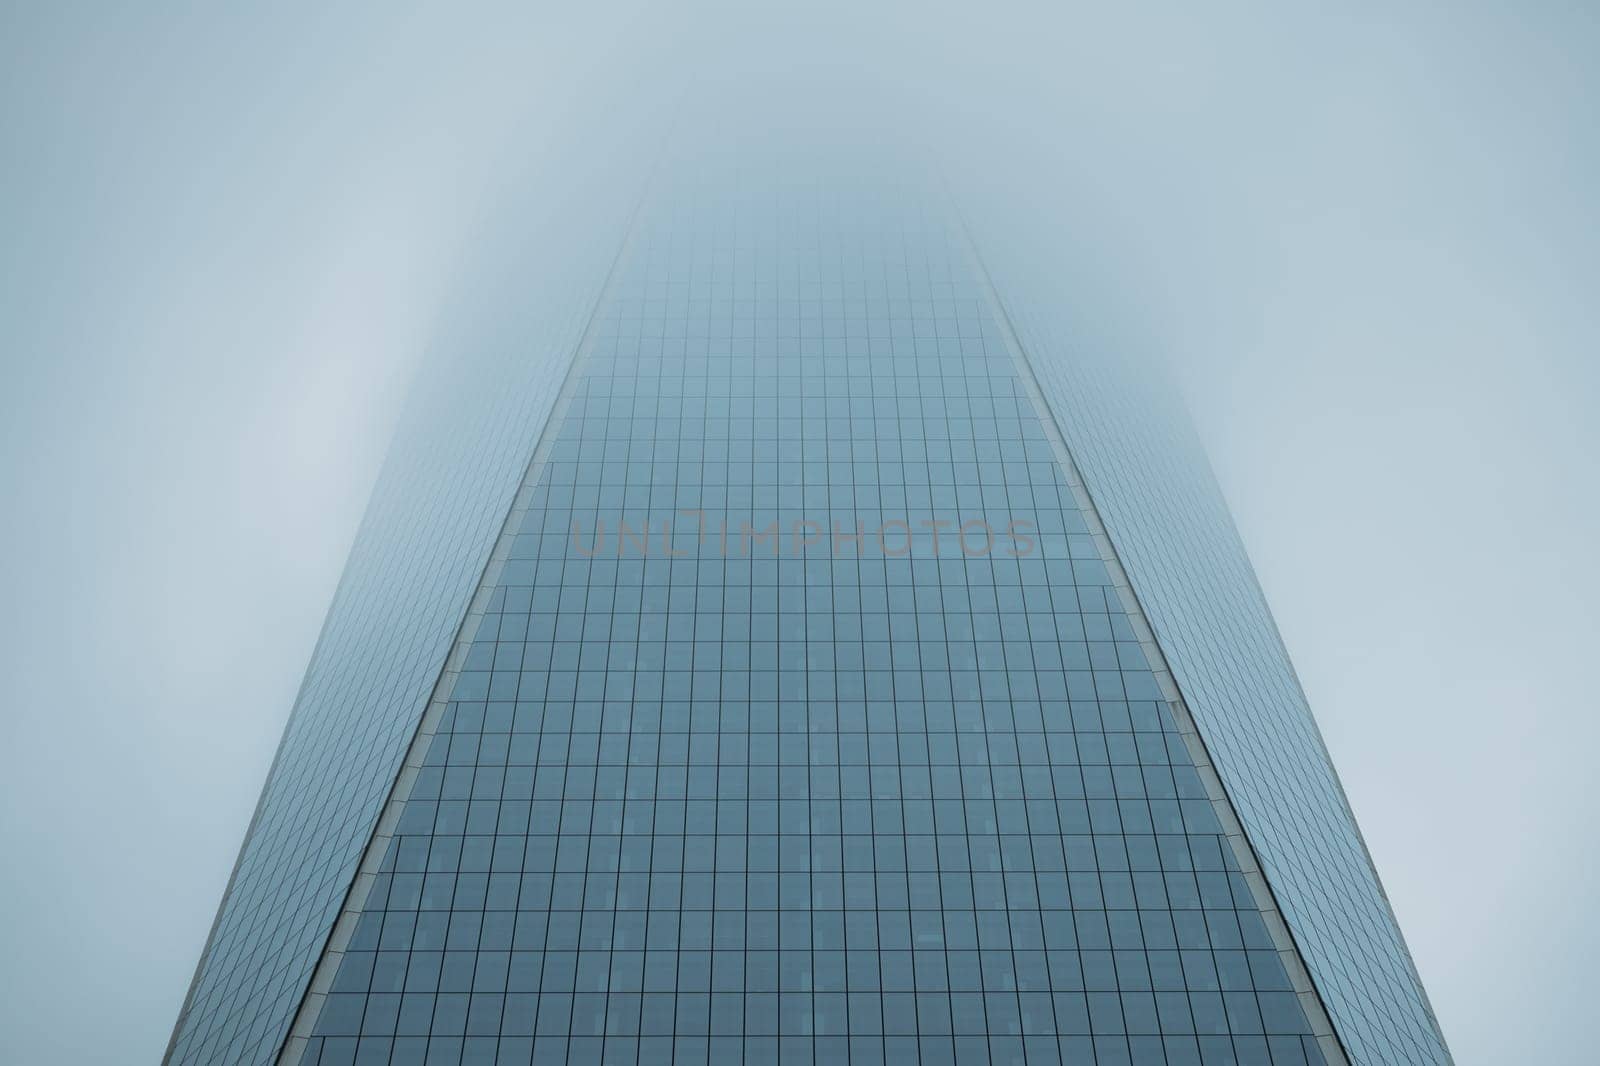 Vanishing Perspective of Modern Glass Skyscraper against Cloudy Sky by apavlin